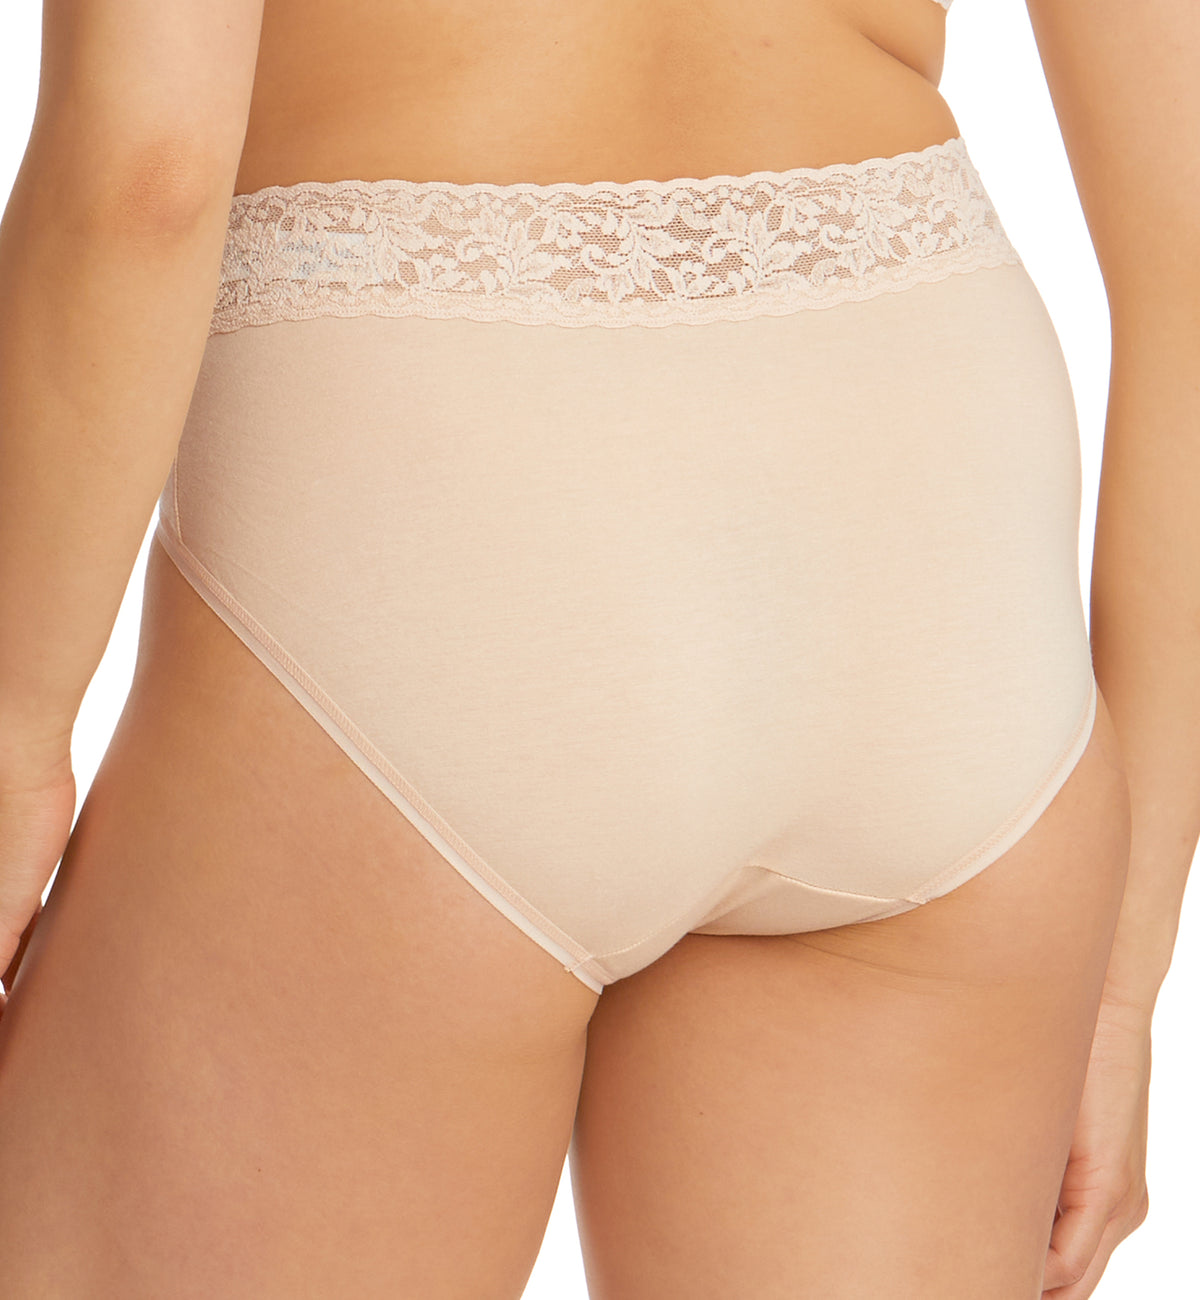 Hanky Panky Cotton French Brief with Lace (892461),Small,Chai - Chai,Small